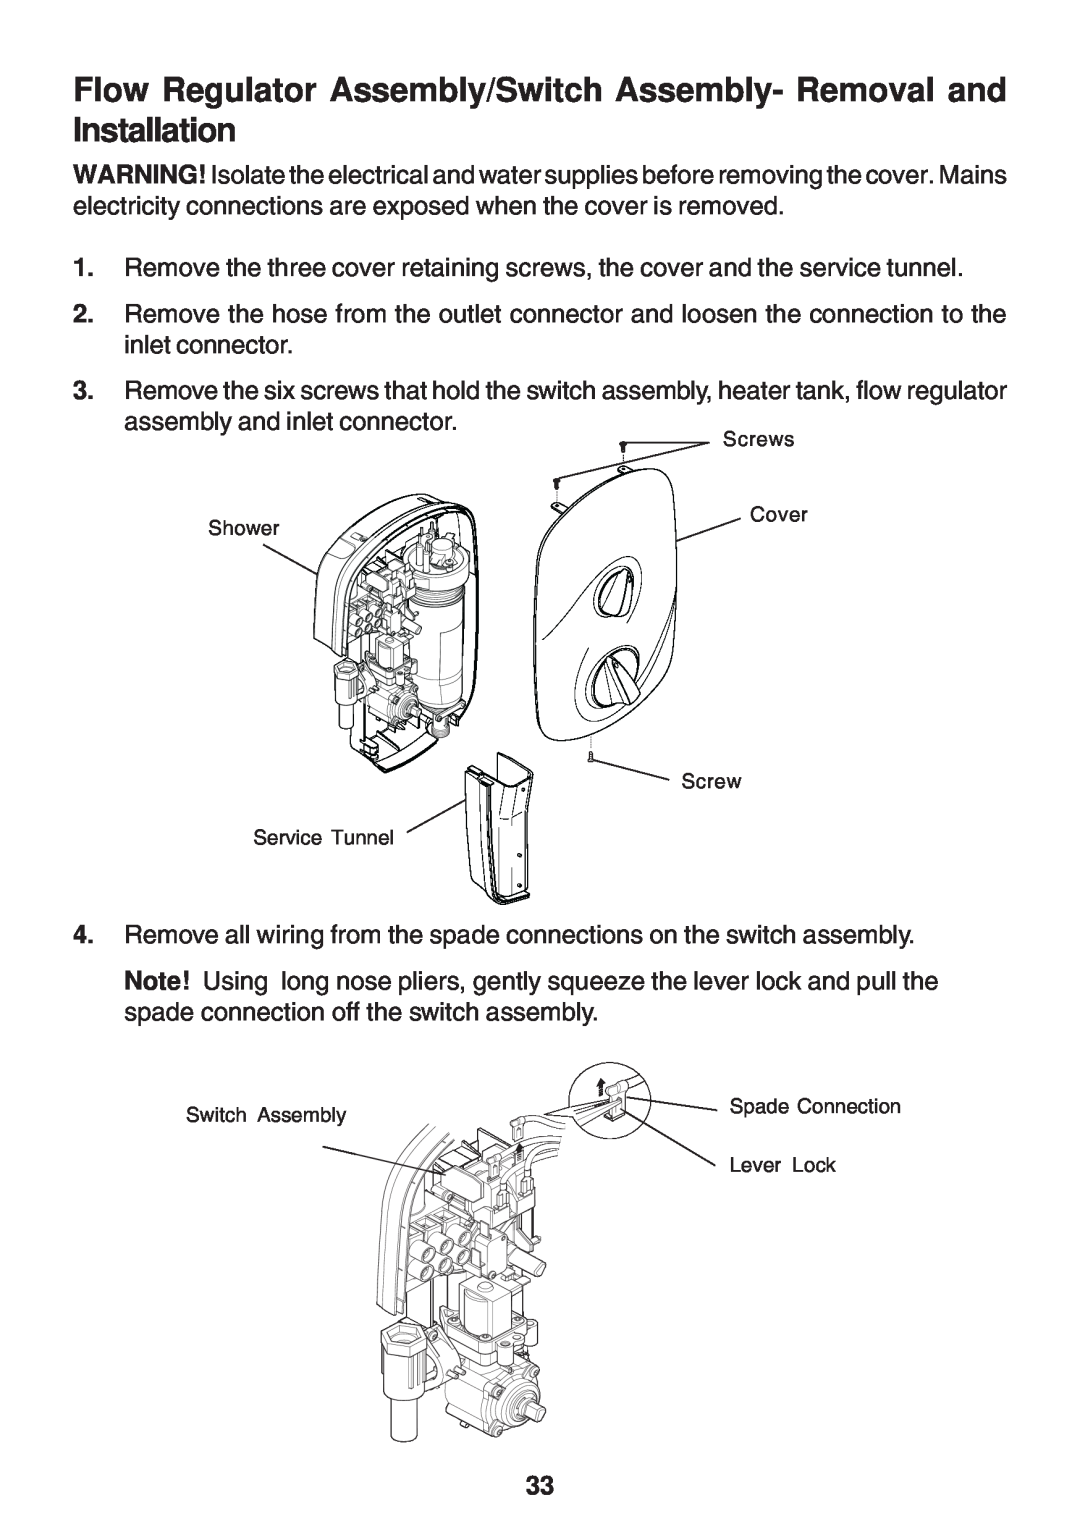 Kohler Electric Shower manual Screws, Cover, Screw Service Tunnel, Switch Assembly, Spade Connection, Lever Lock 